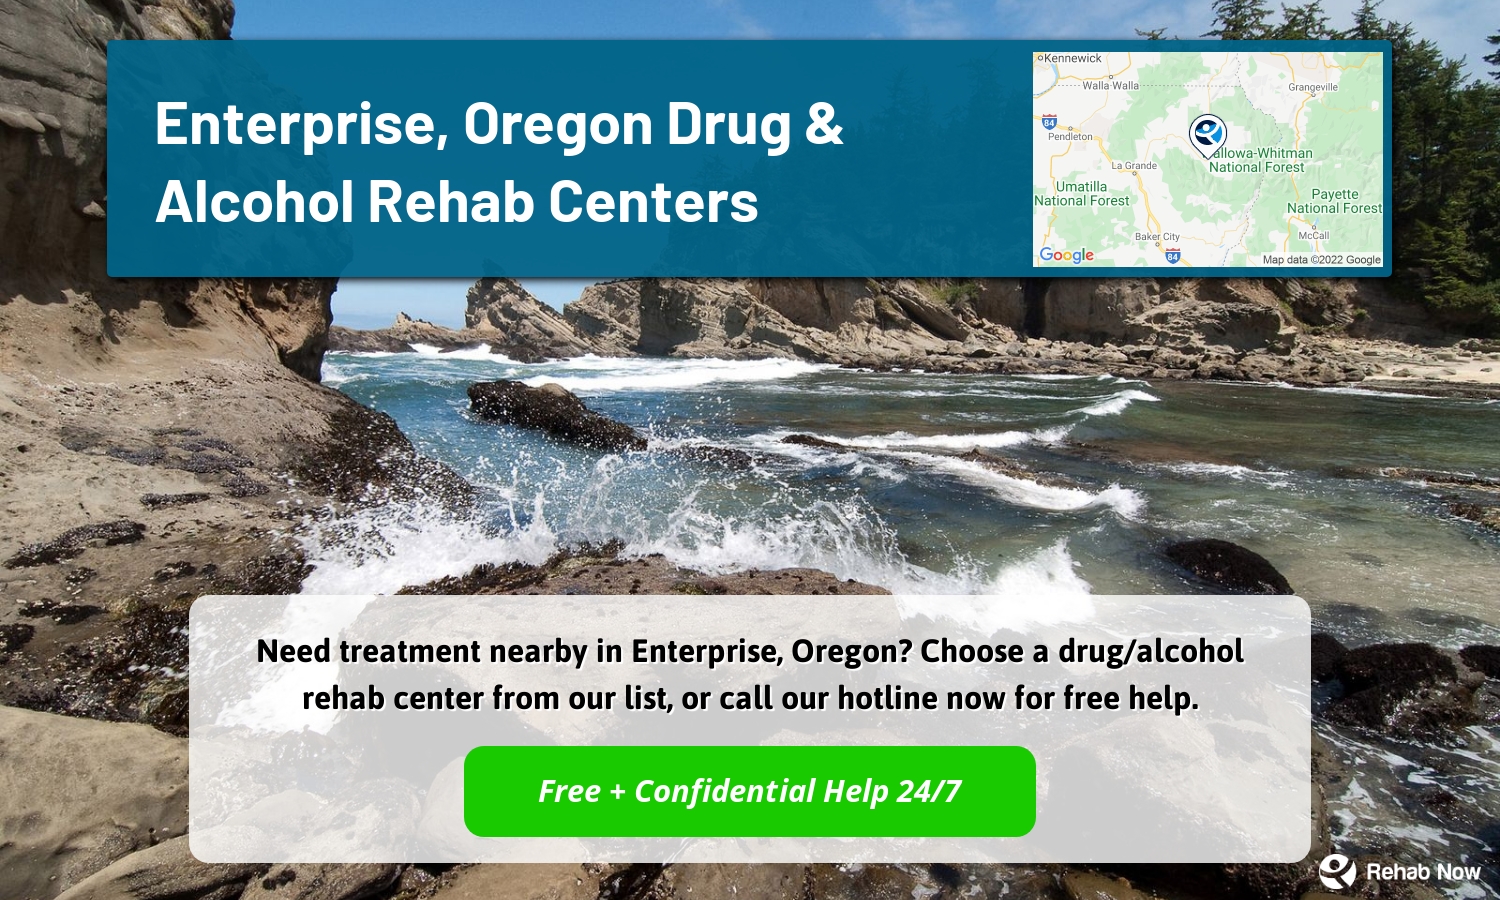 Need treatment nearby in Enterprise, Oregon? Choose a drug/alcohol rehab center from our list, or call our hotline now for free help.